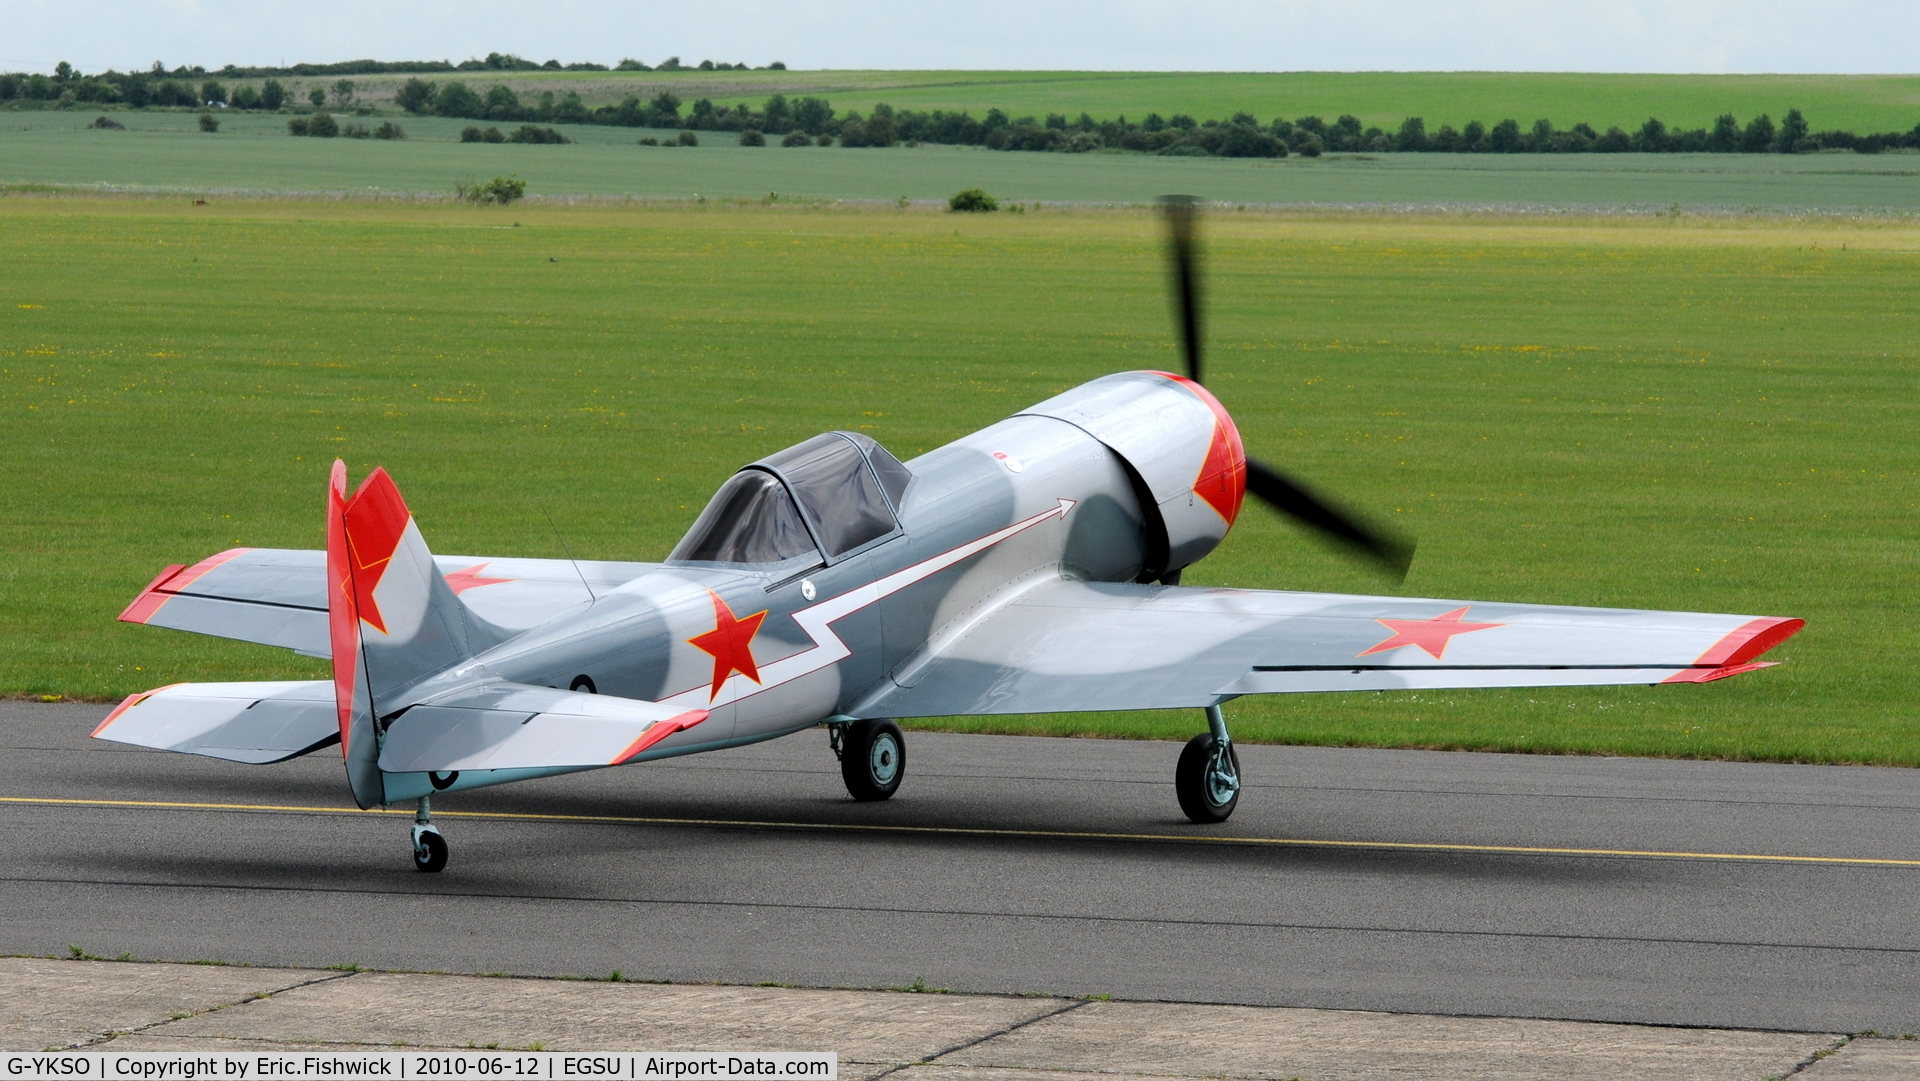 G-YKSO, 1979 Yakovlev Yak-50 C/N 791506, 2. G-YKSO at The Duxford Trophy Aerobatic Contest, June 2010